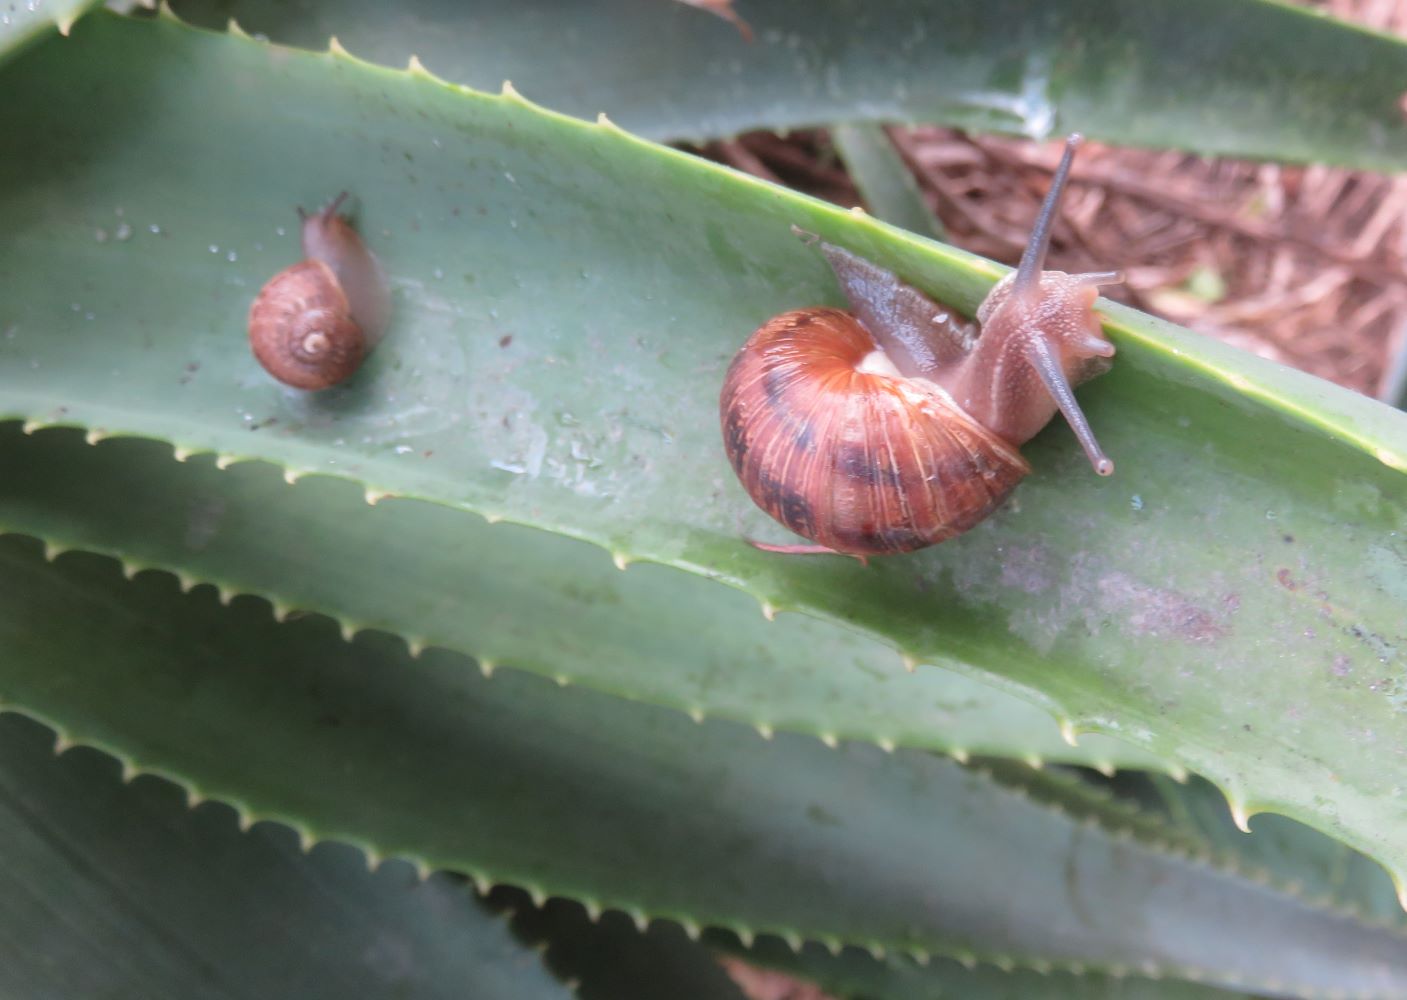 Snails move by preference on smooth surfaces, like waxy leaves and plastic.